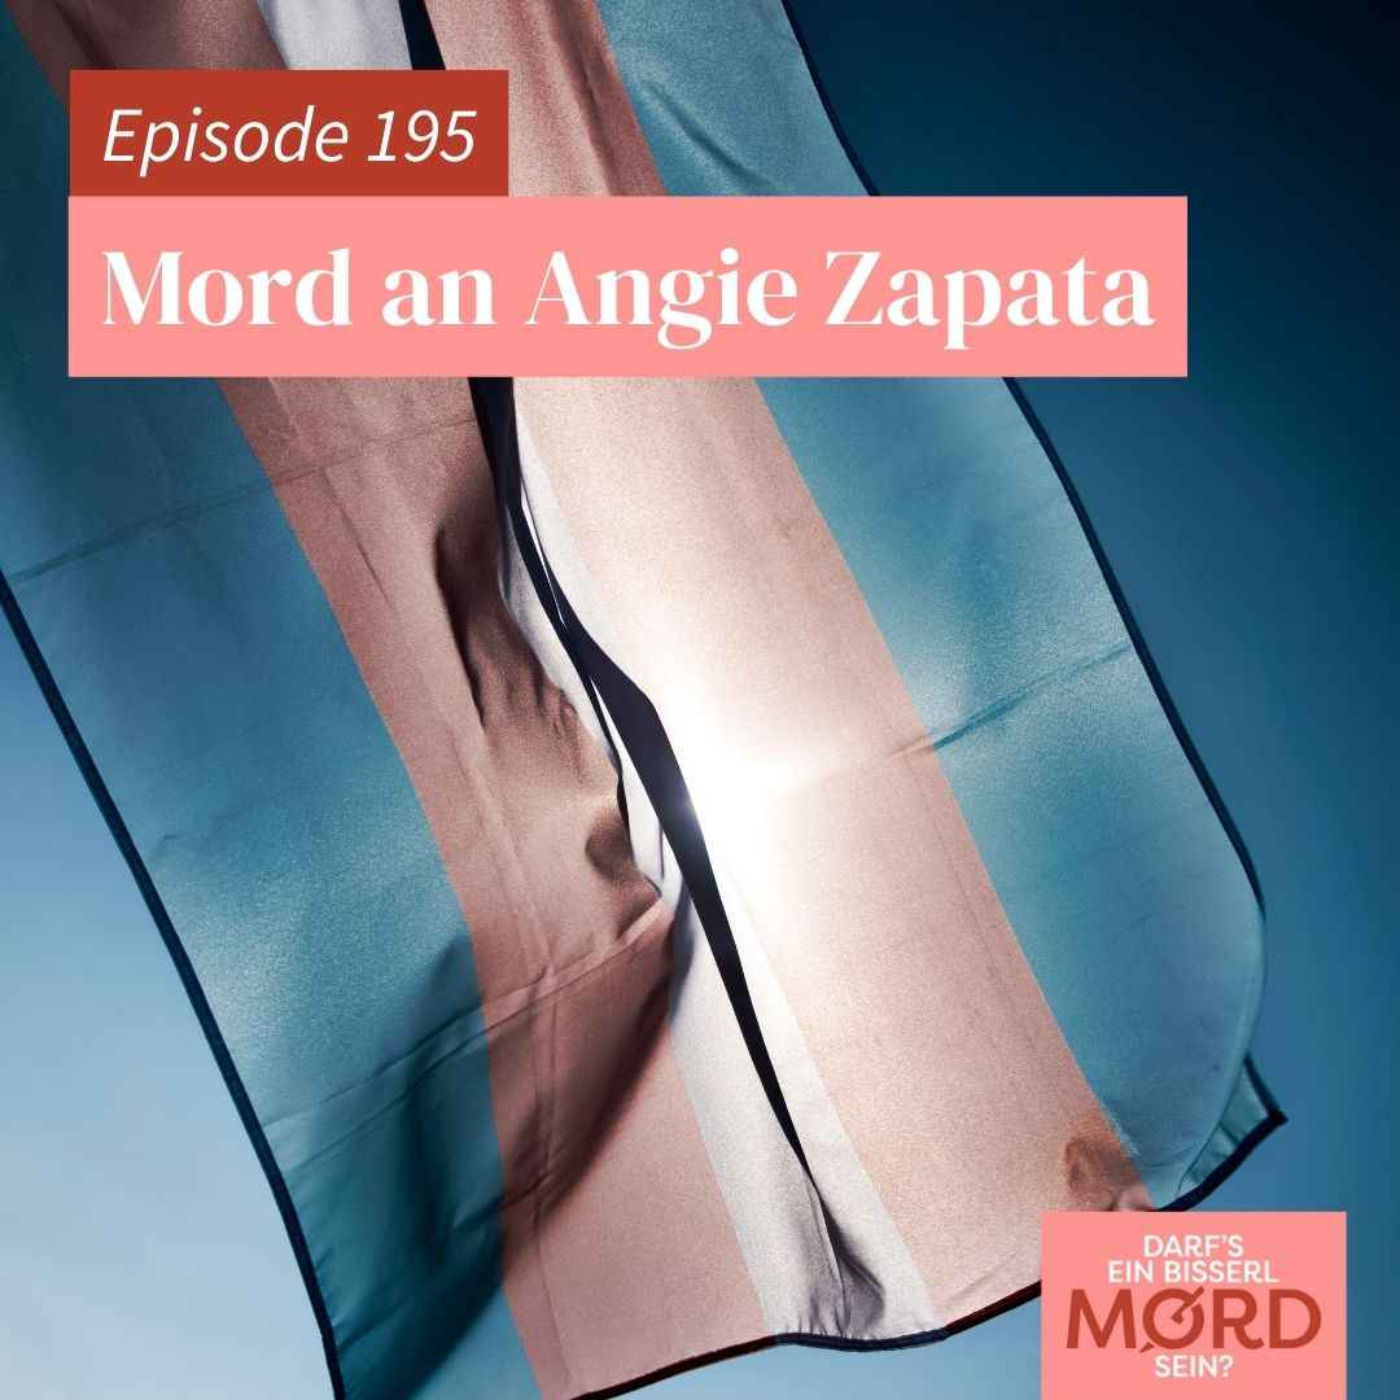 Episode 195: Mord an Angie Zapata